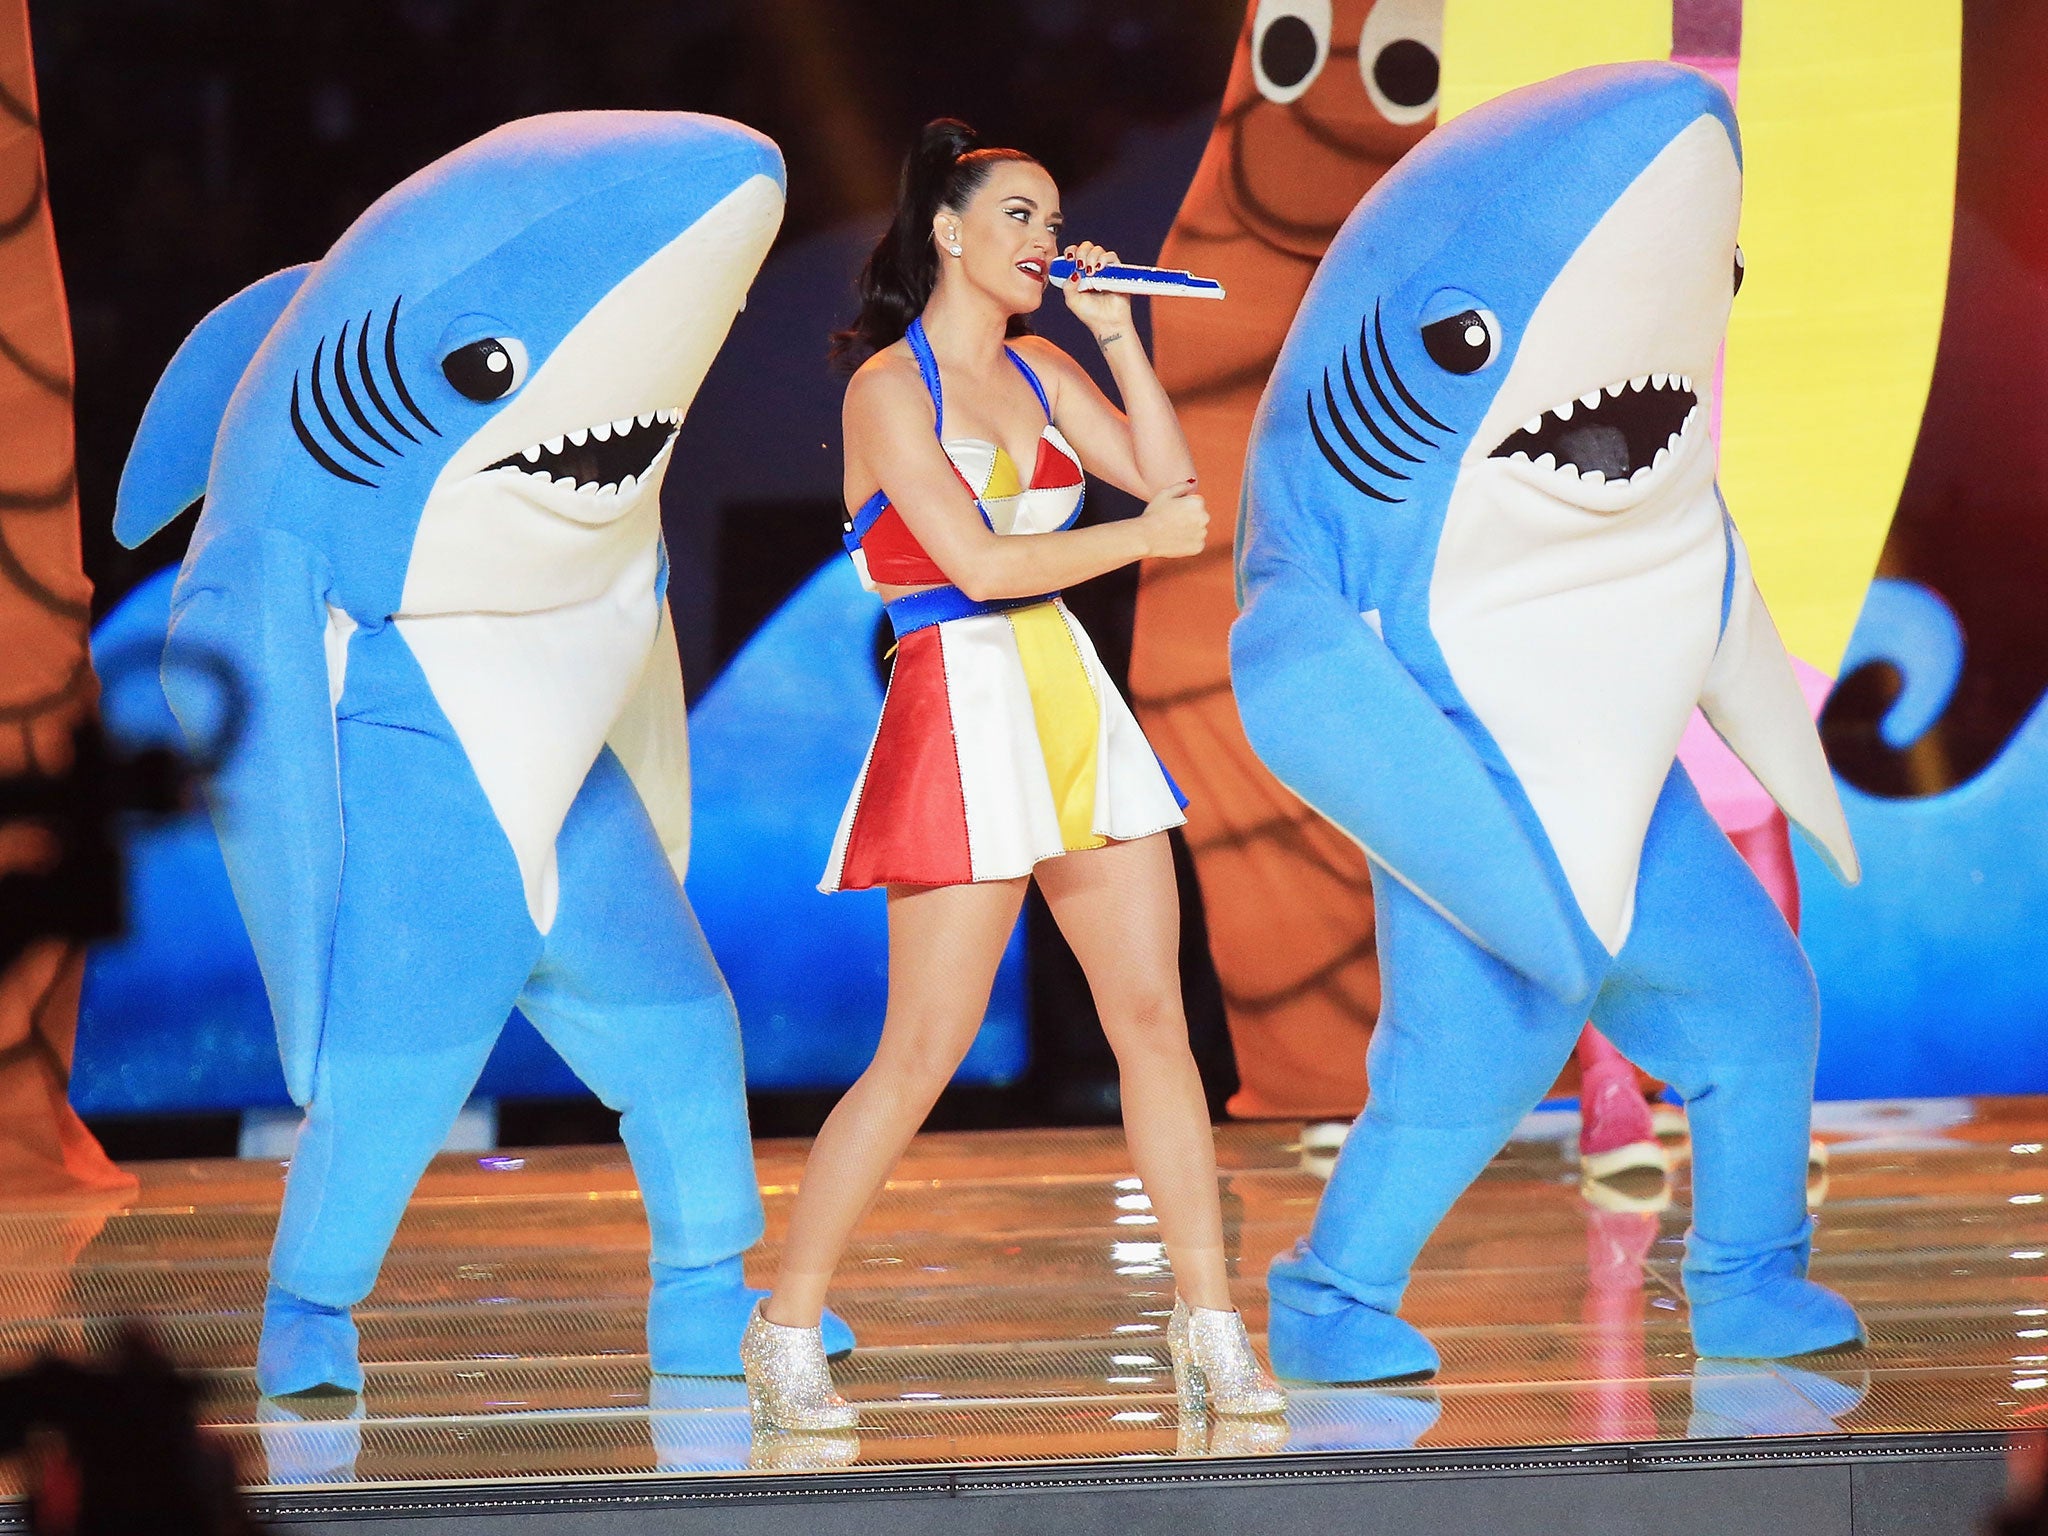 The game looks set to seize on the momentum from Katy Perry's performance at the Super Bowl, which drew millions of viewers as well as jokes about 'Left Shark'